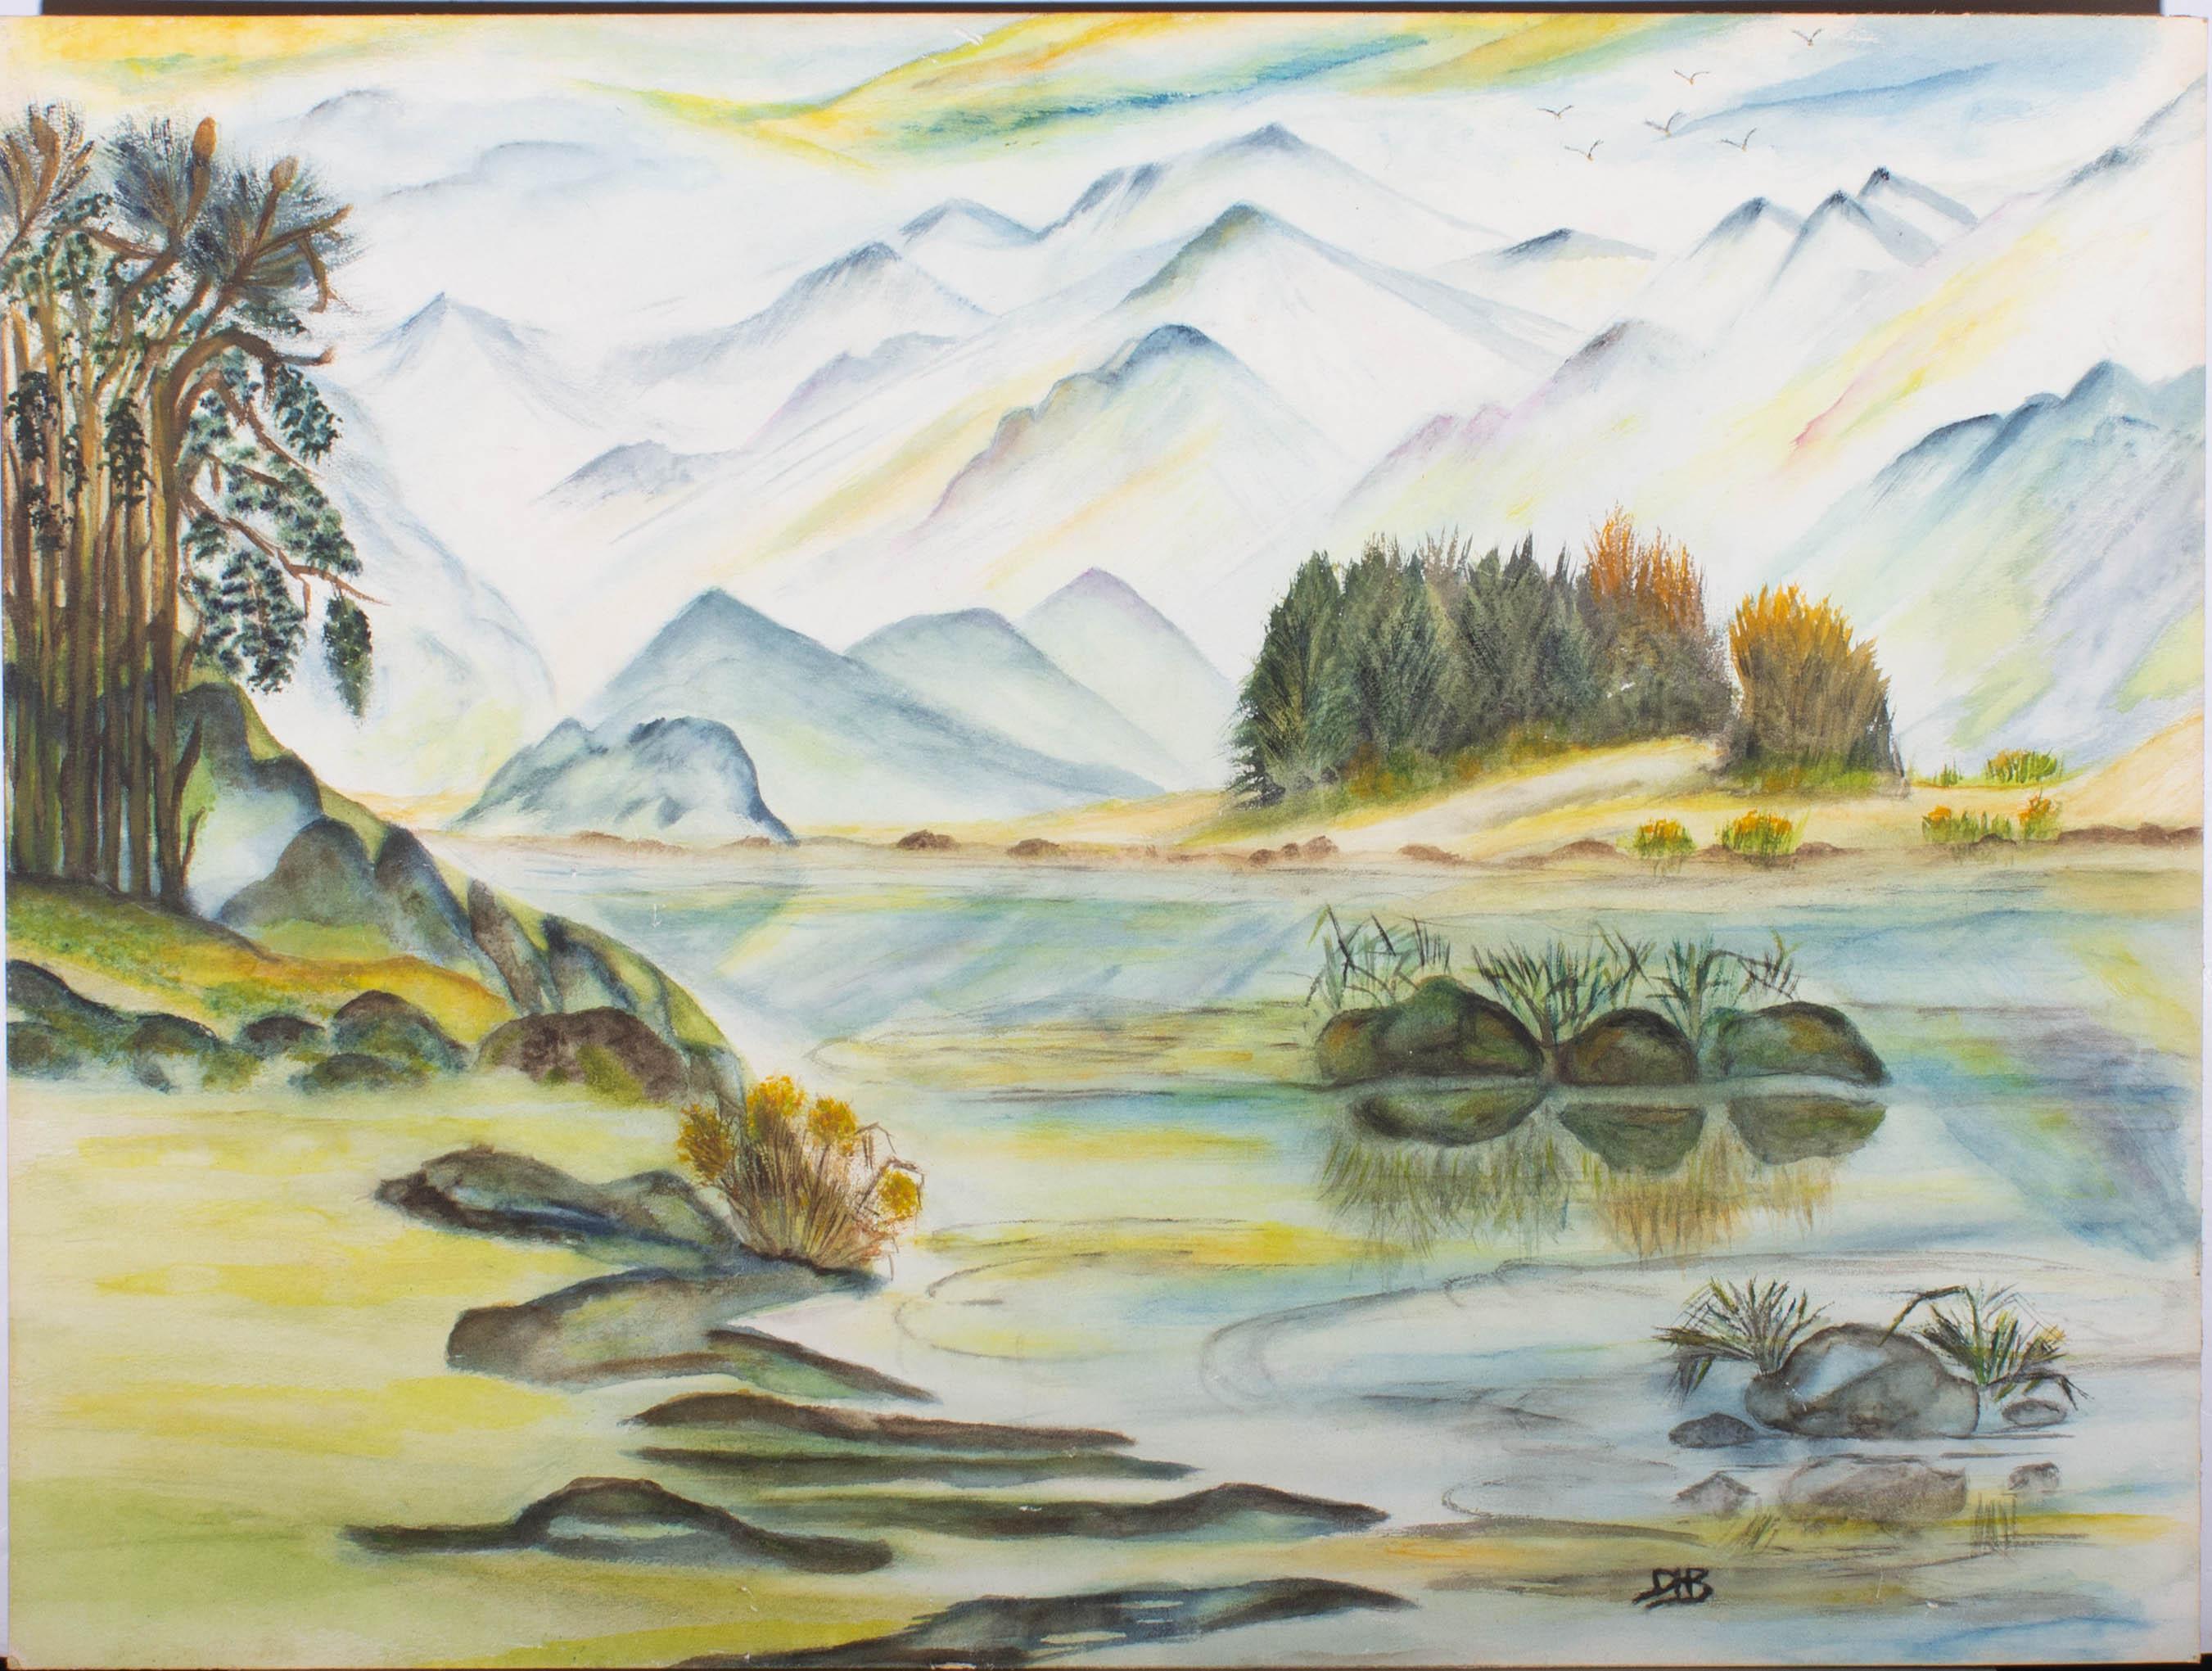 A charmingly naive landscape in watercolour, showing an Alpine lake at the foot of impressive mountains. The artist has initialed to the lower right and the painting is on watercolor board. The painting is presented with the original backing board